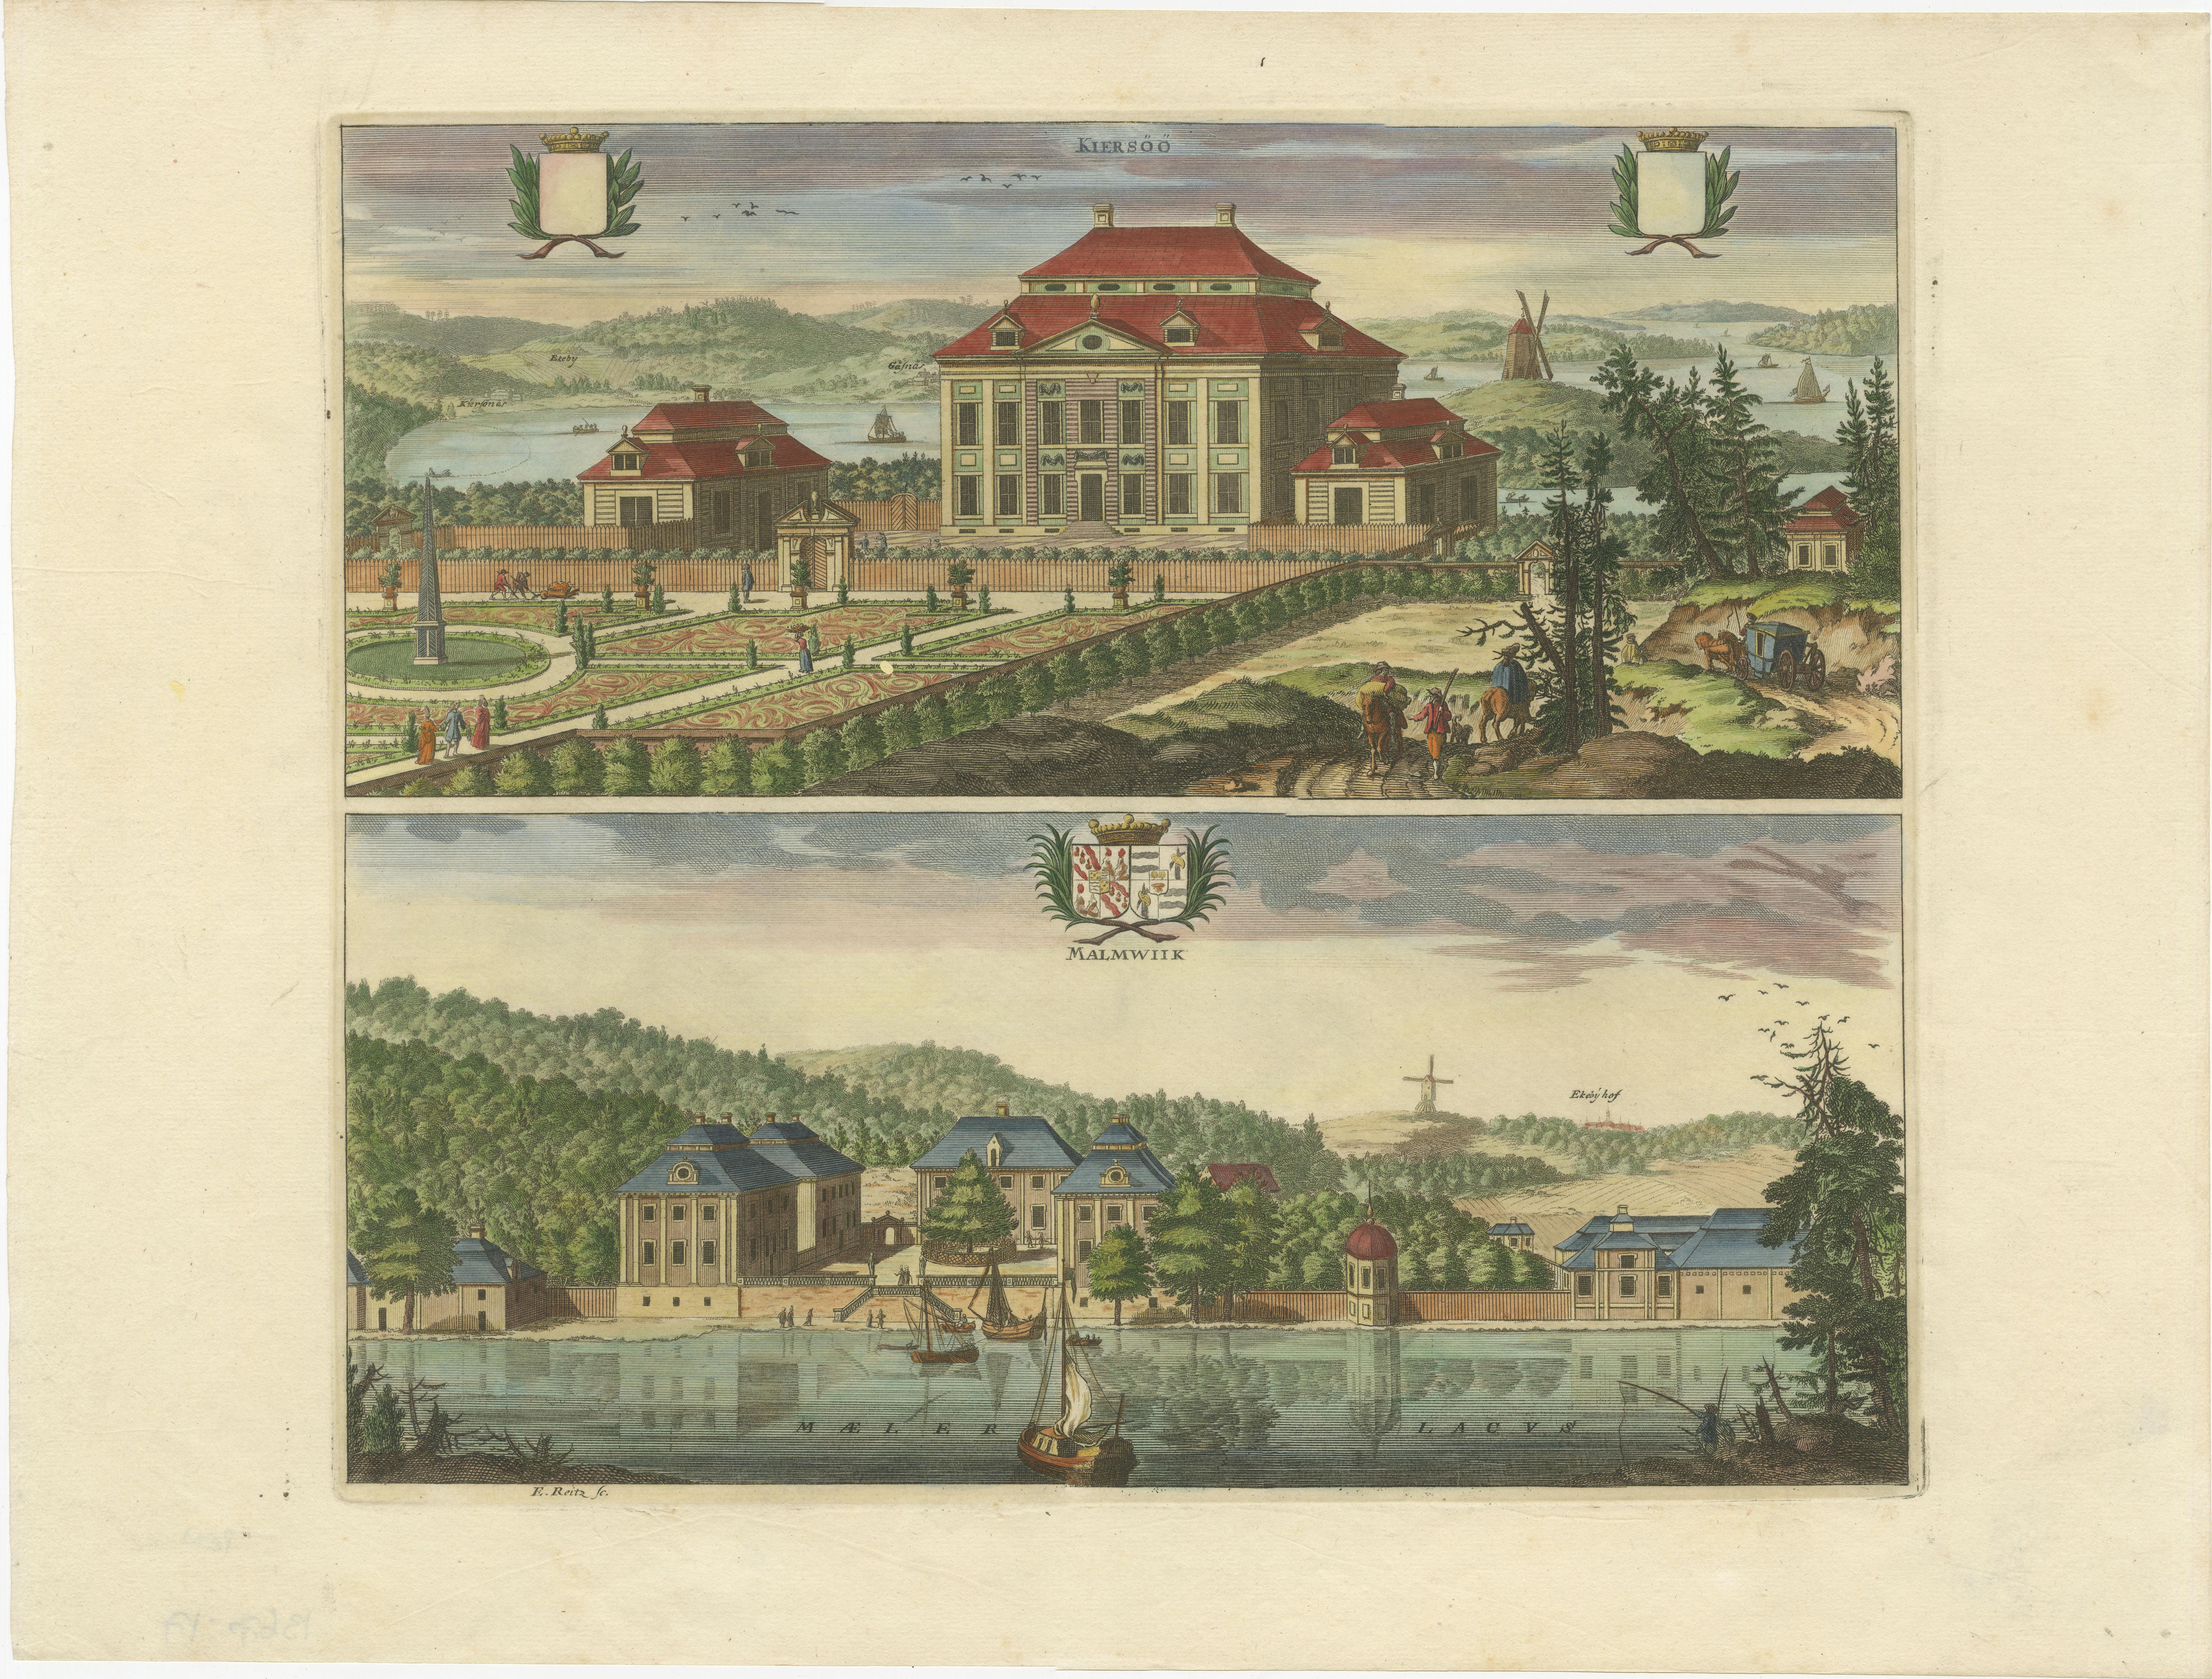 The manors depicted in this original antique engraving, Kärsö and Malmvik, are located in Sweden.

The image is a copper engraving from the famous work 